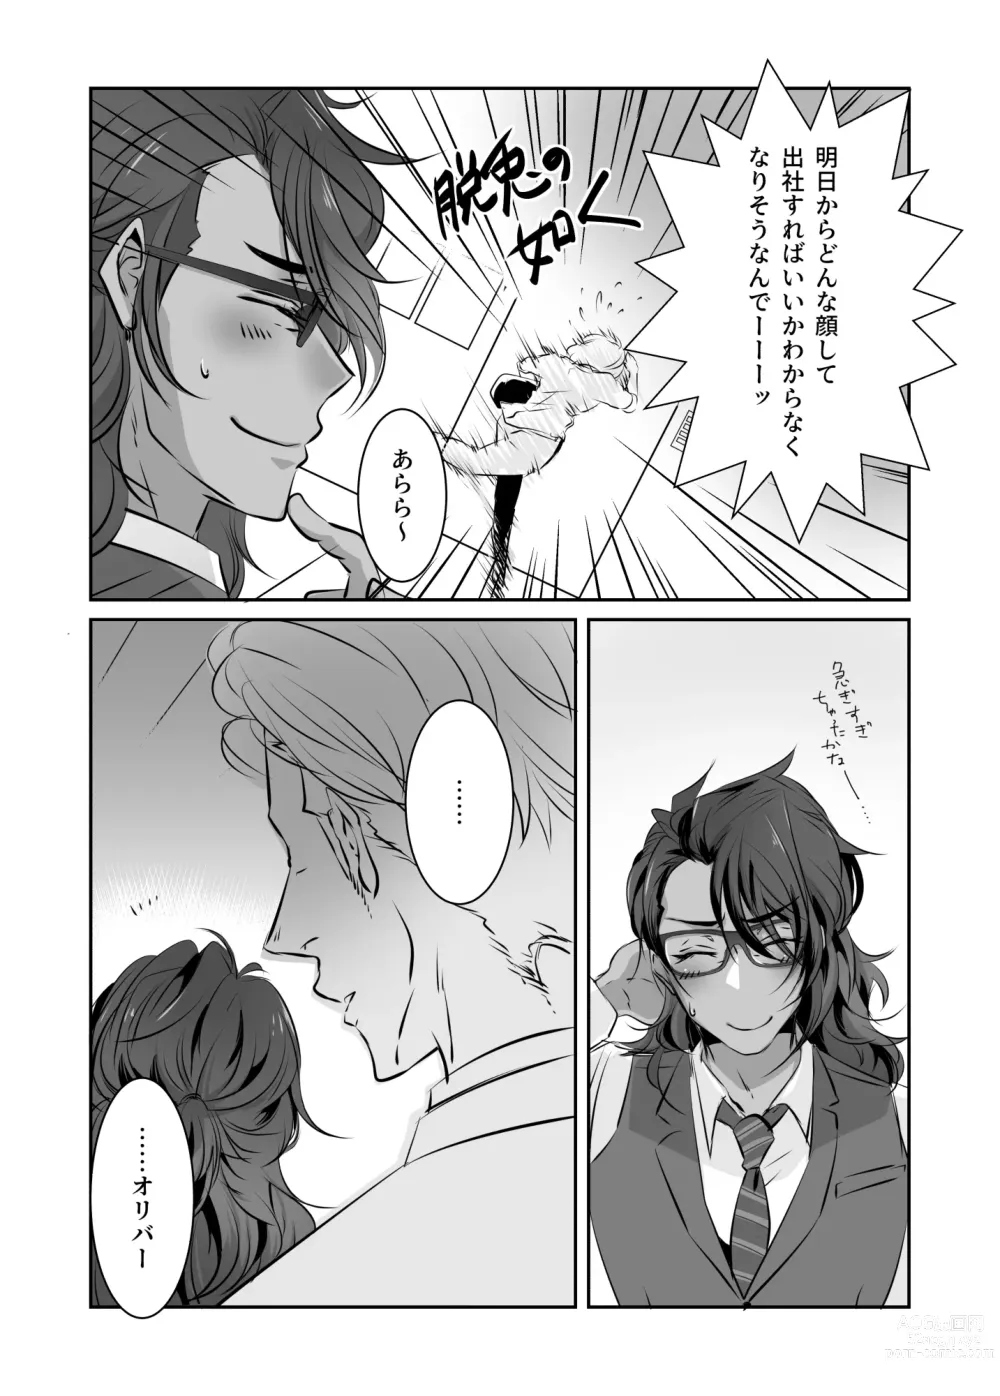 Page 5 of doujinshi Mr. Oliver, a chic boss